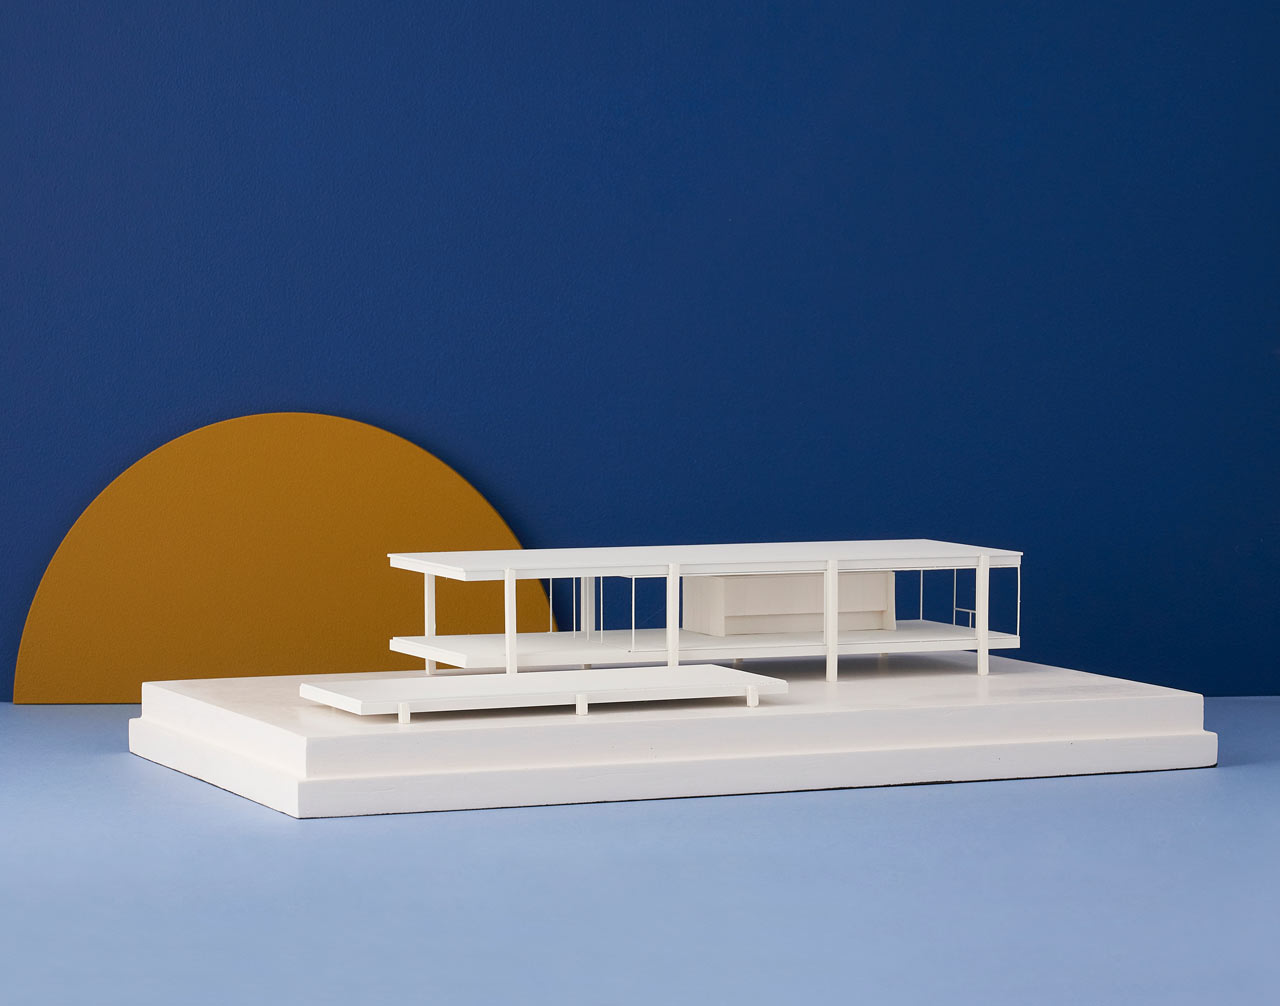 How Chisel & Mouse Crafts a 3D Model of the Iconic Farnsworth House